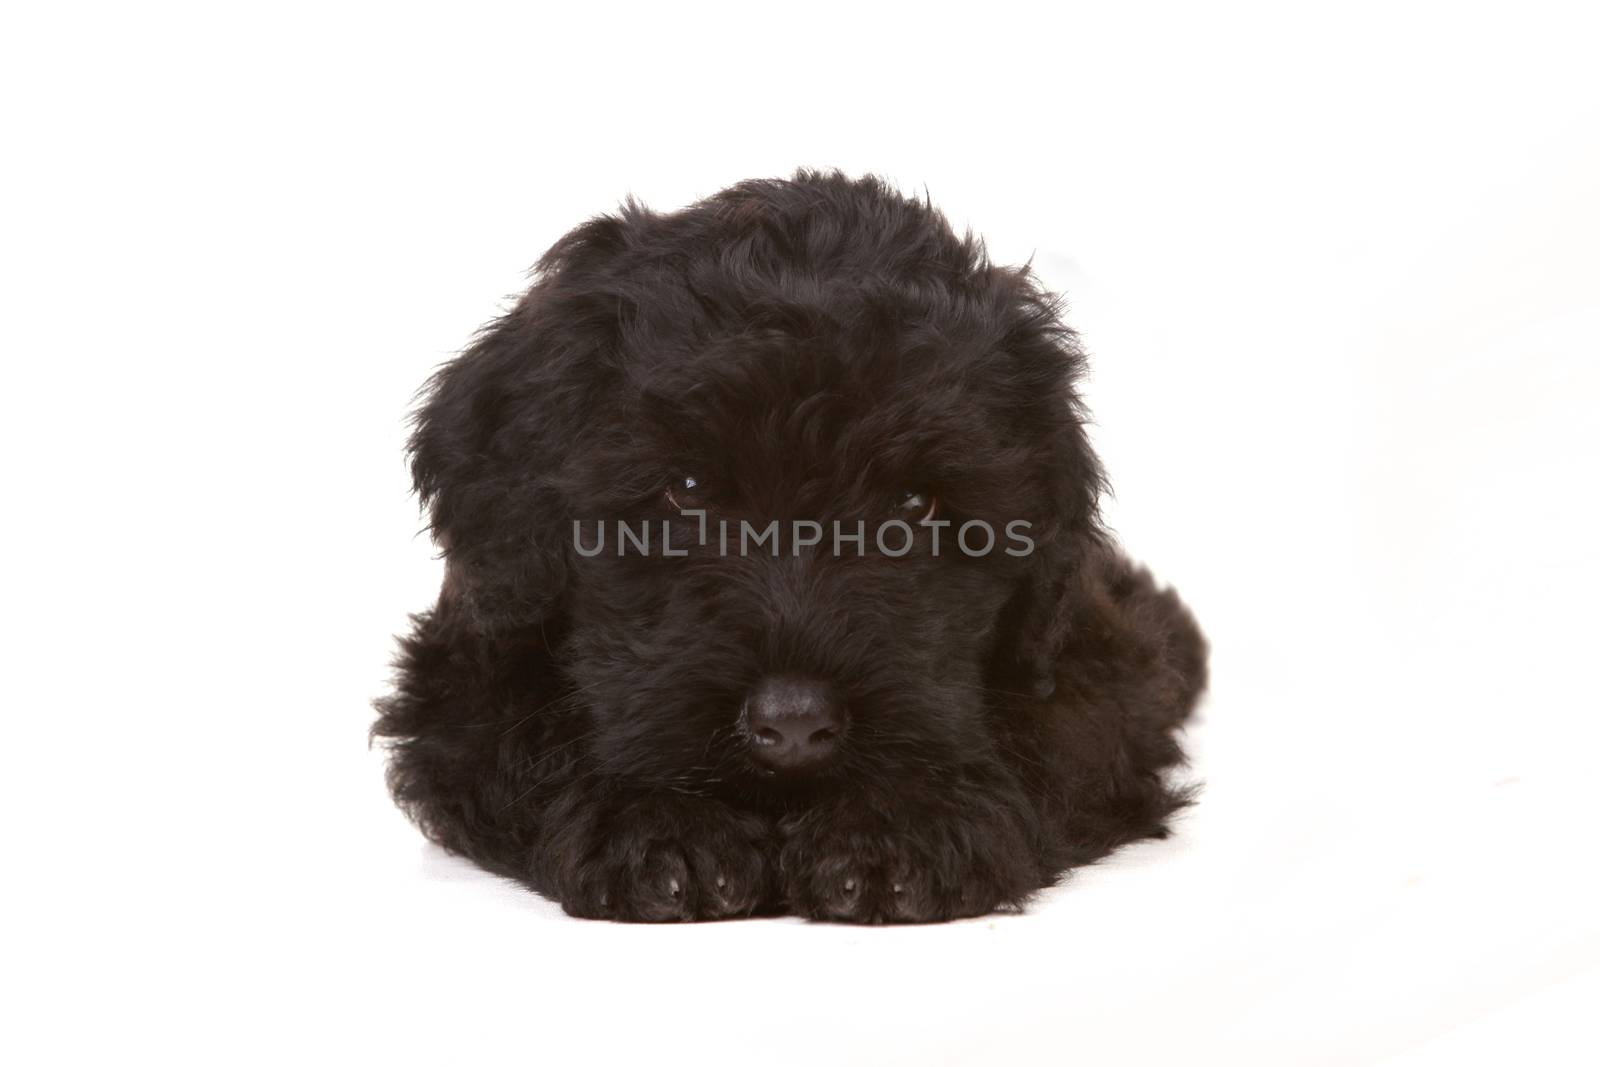 Black Russian Terrier Puppy on White Background